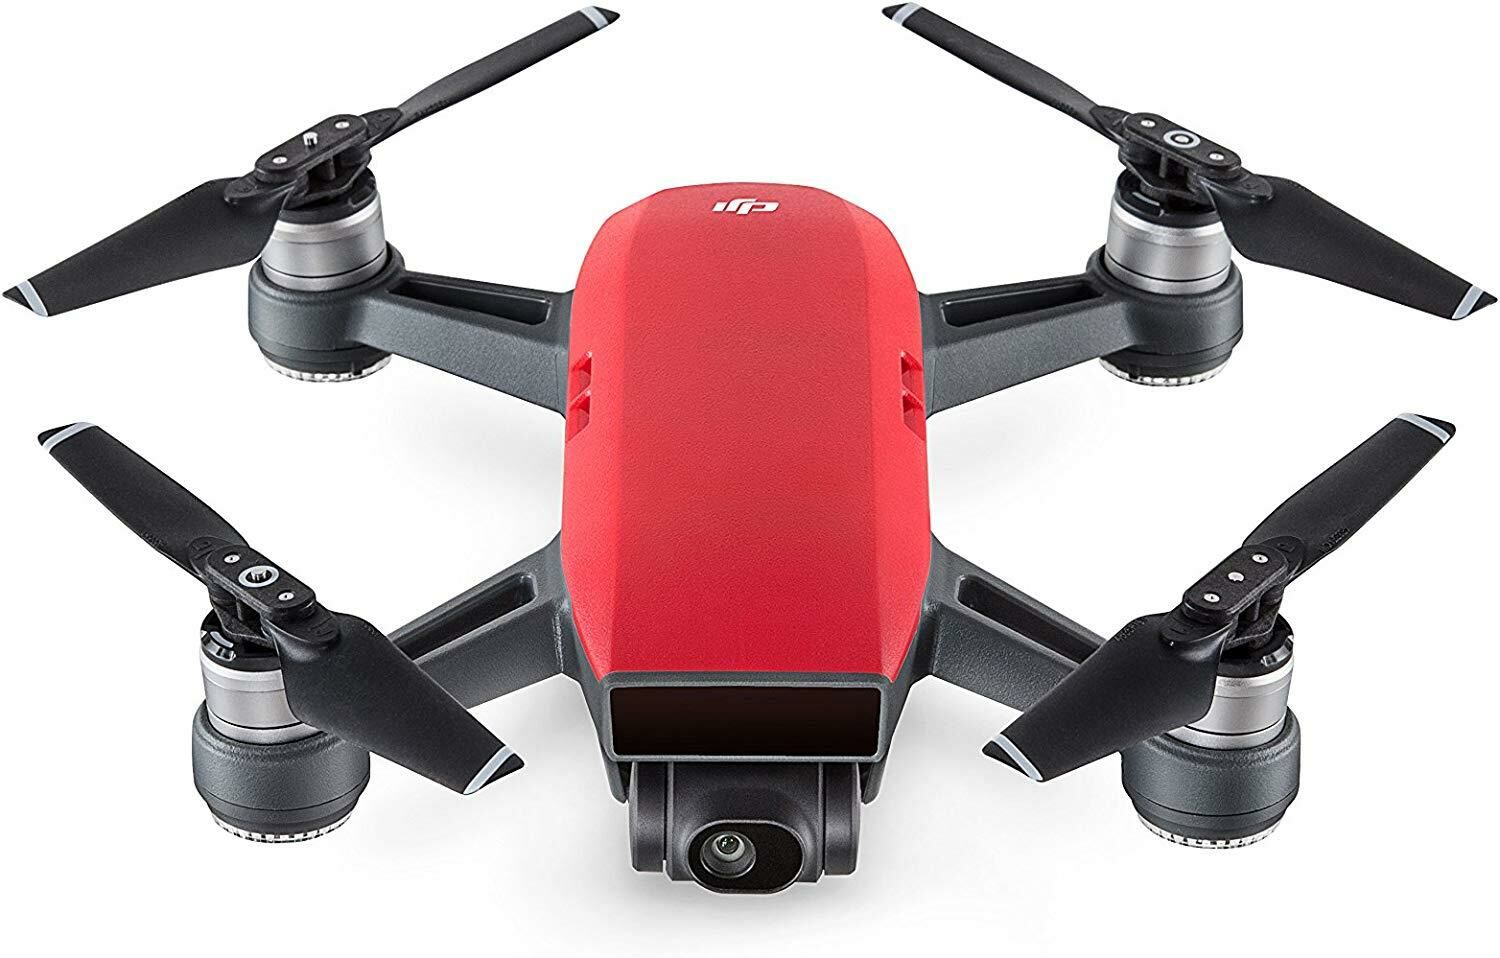 DJI Spark Fly More Combo Drone (RED)